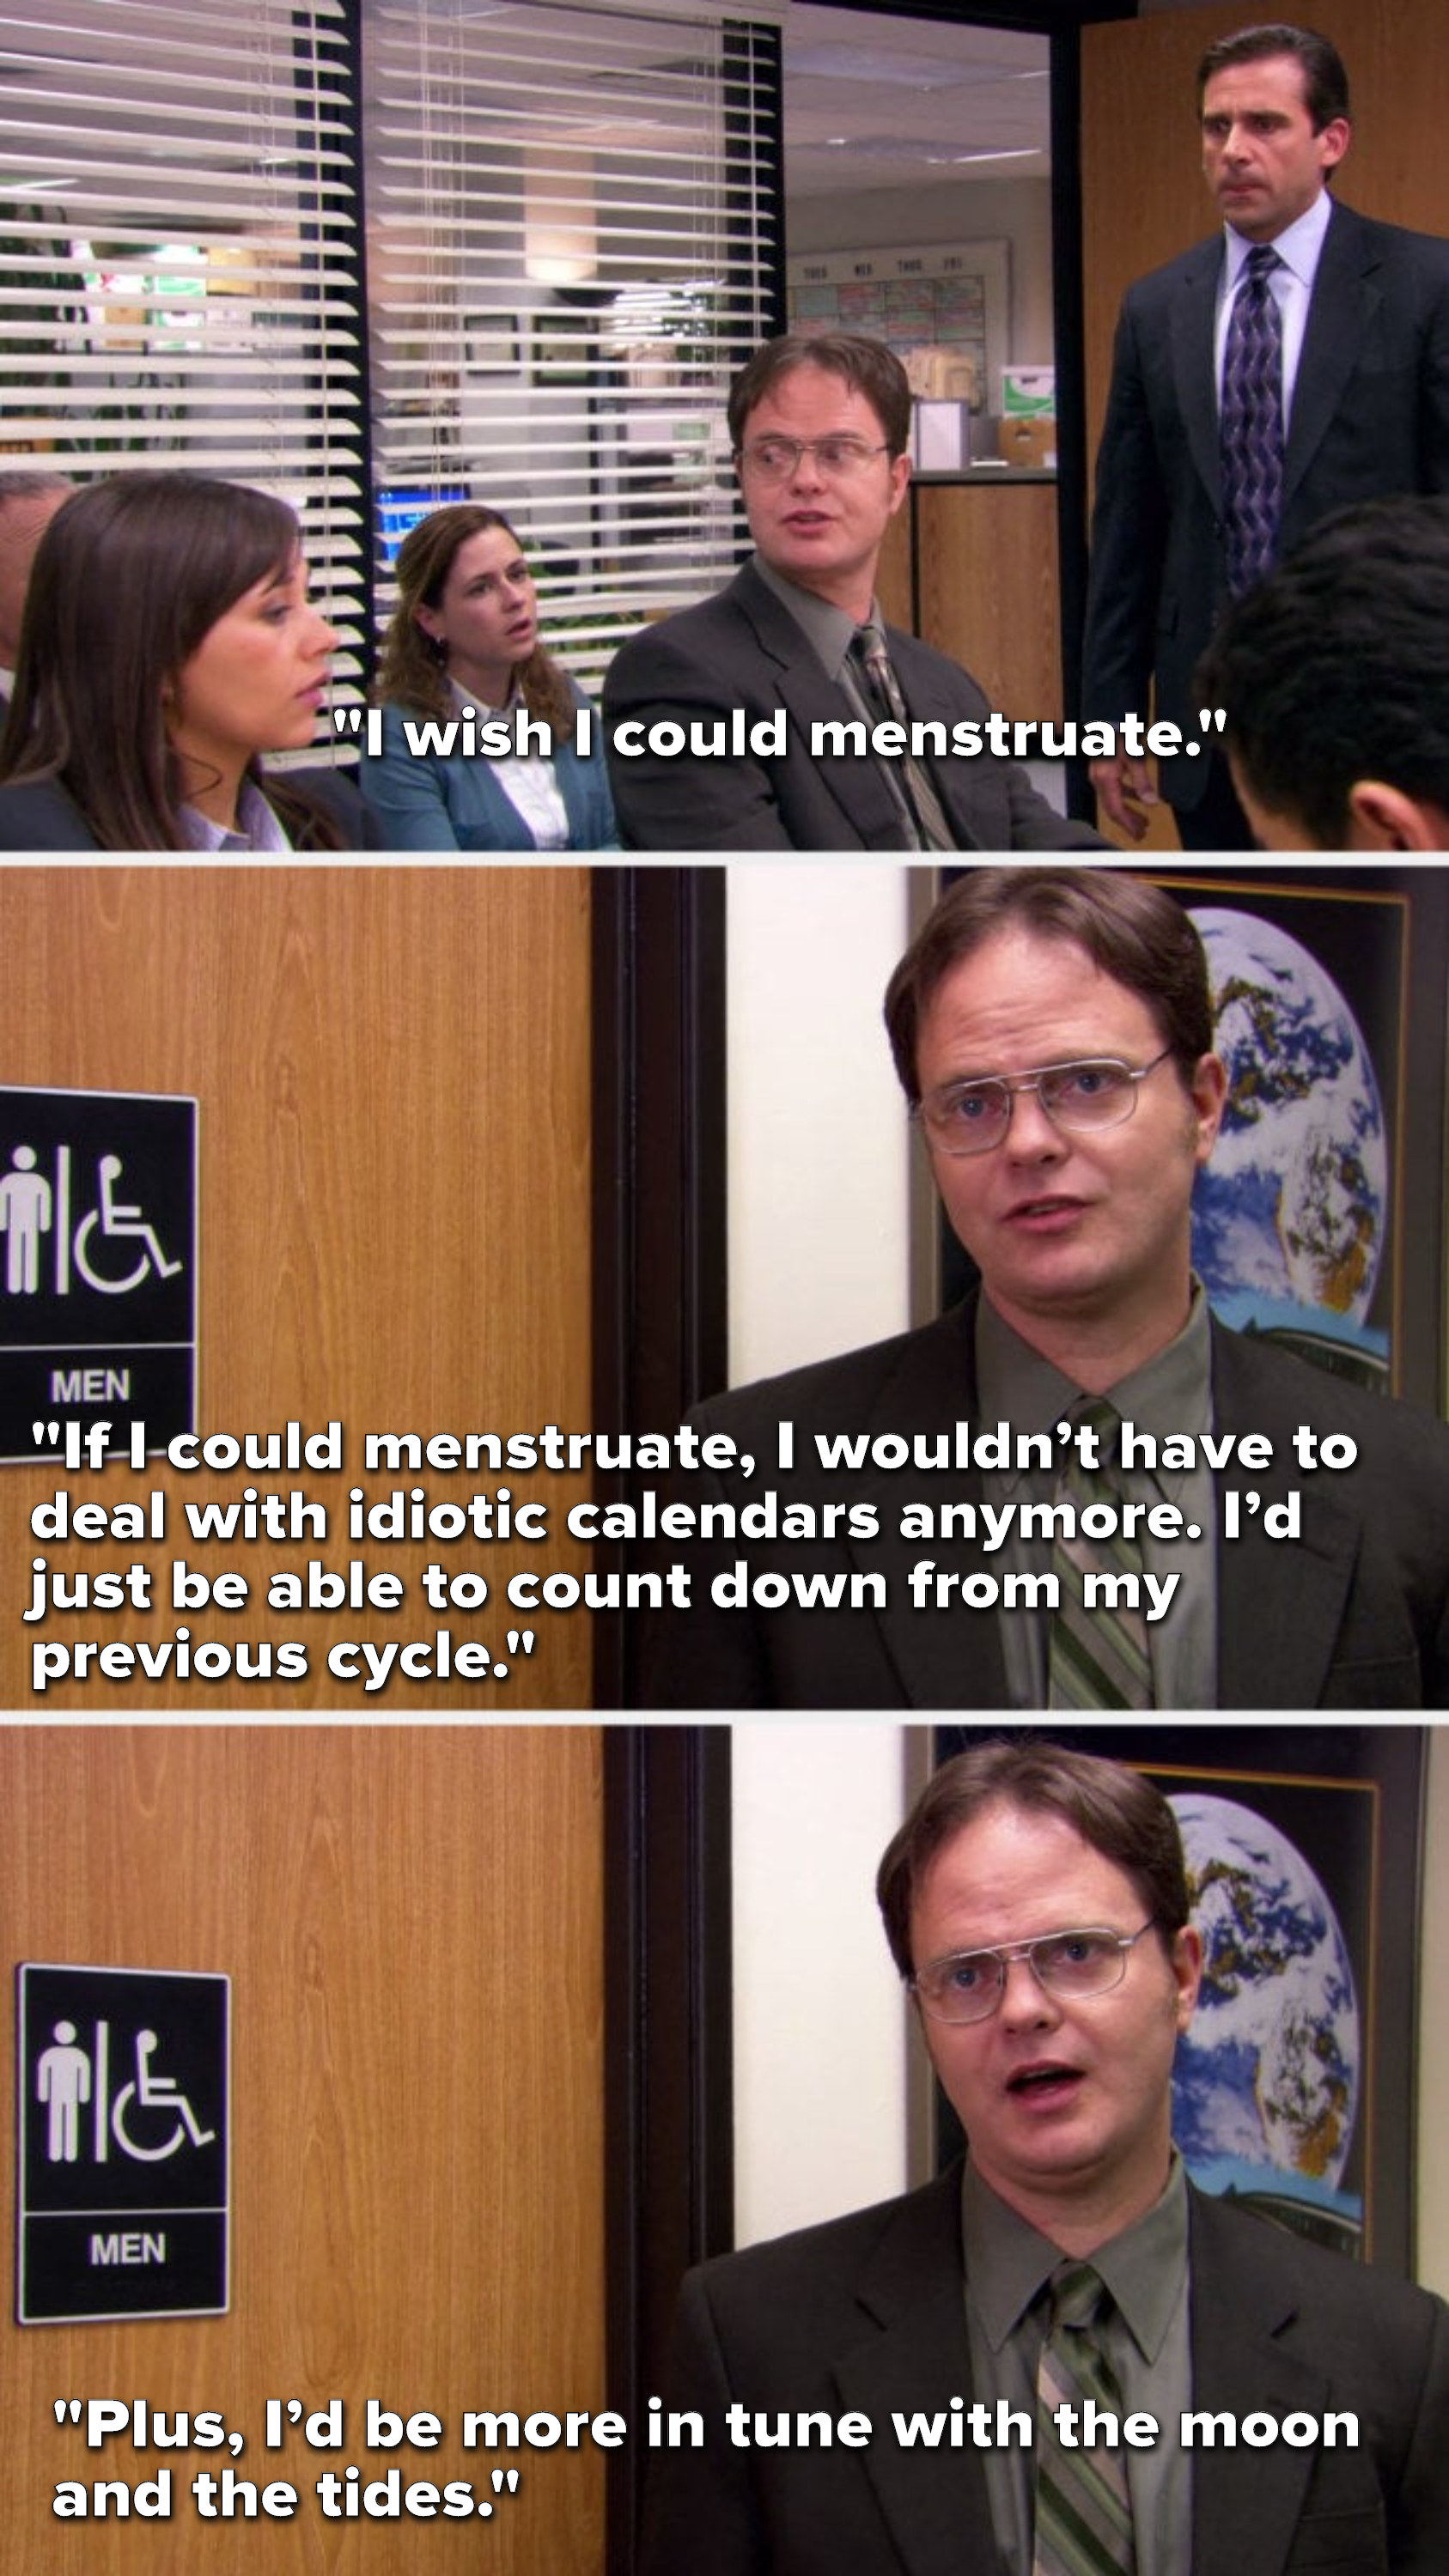 Dwight says, &quot;I wish I could menstruate, If I could menstruate, I wouldn’t have to deal with idiotic calendars anymore, I’d just be able to count down from my previous cycle, plus, I’d be more in tune with the moon and the tides&quot;